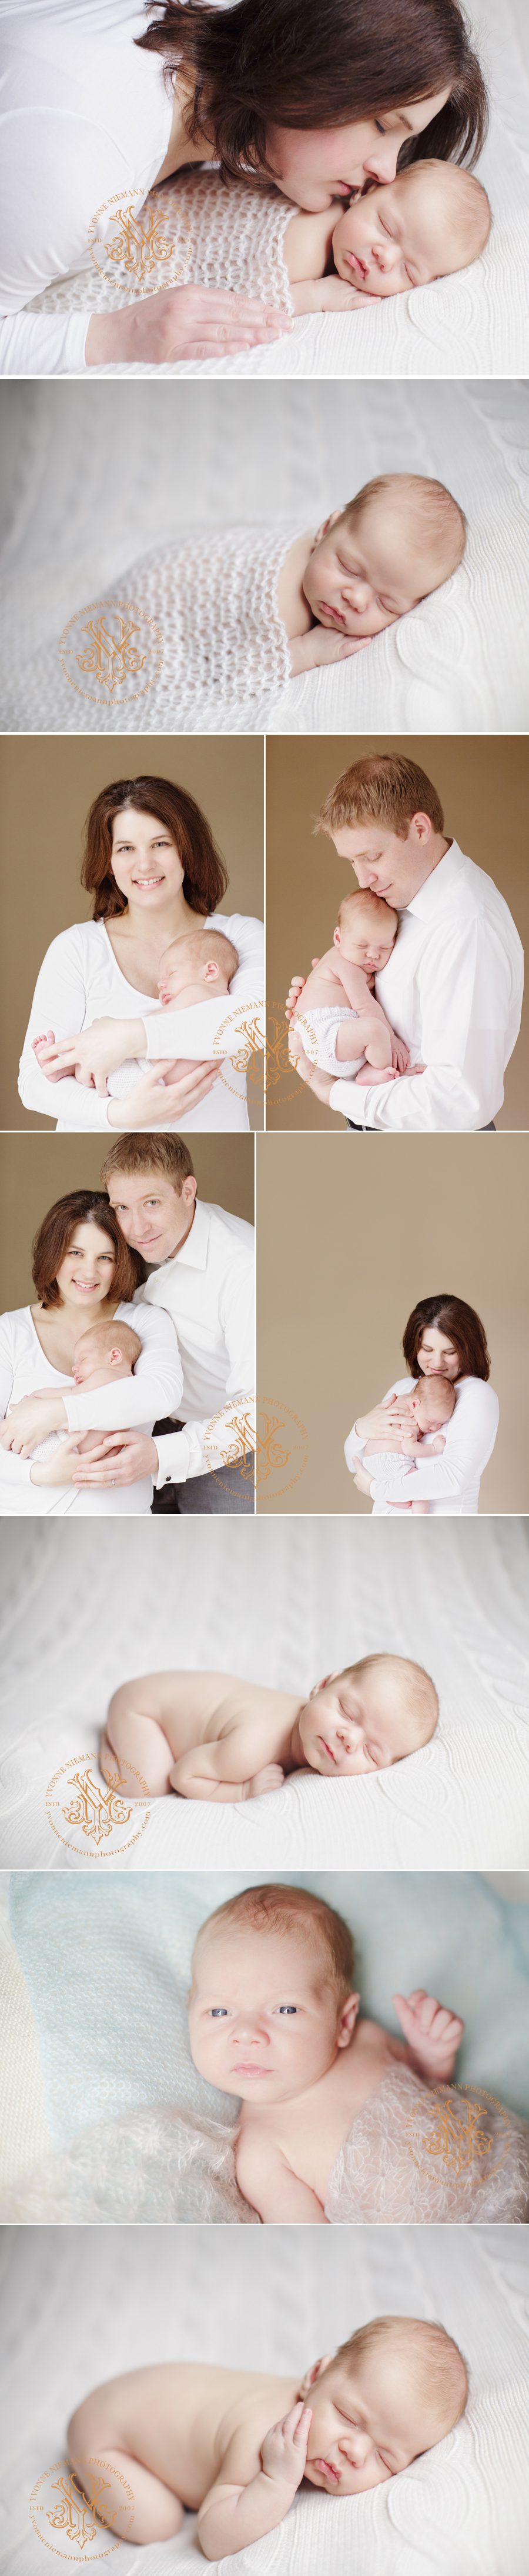 Family and newborn portraits in Universtiy City taken by Yvonne Niemann Photography.